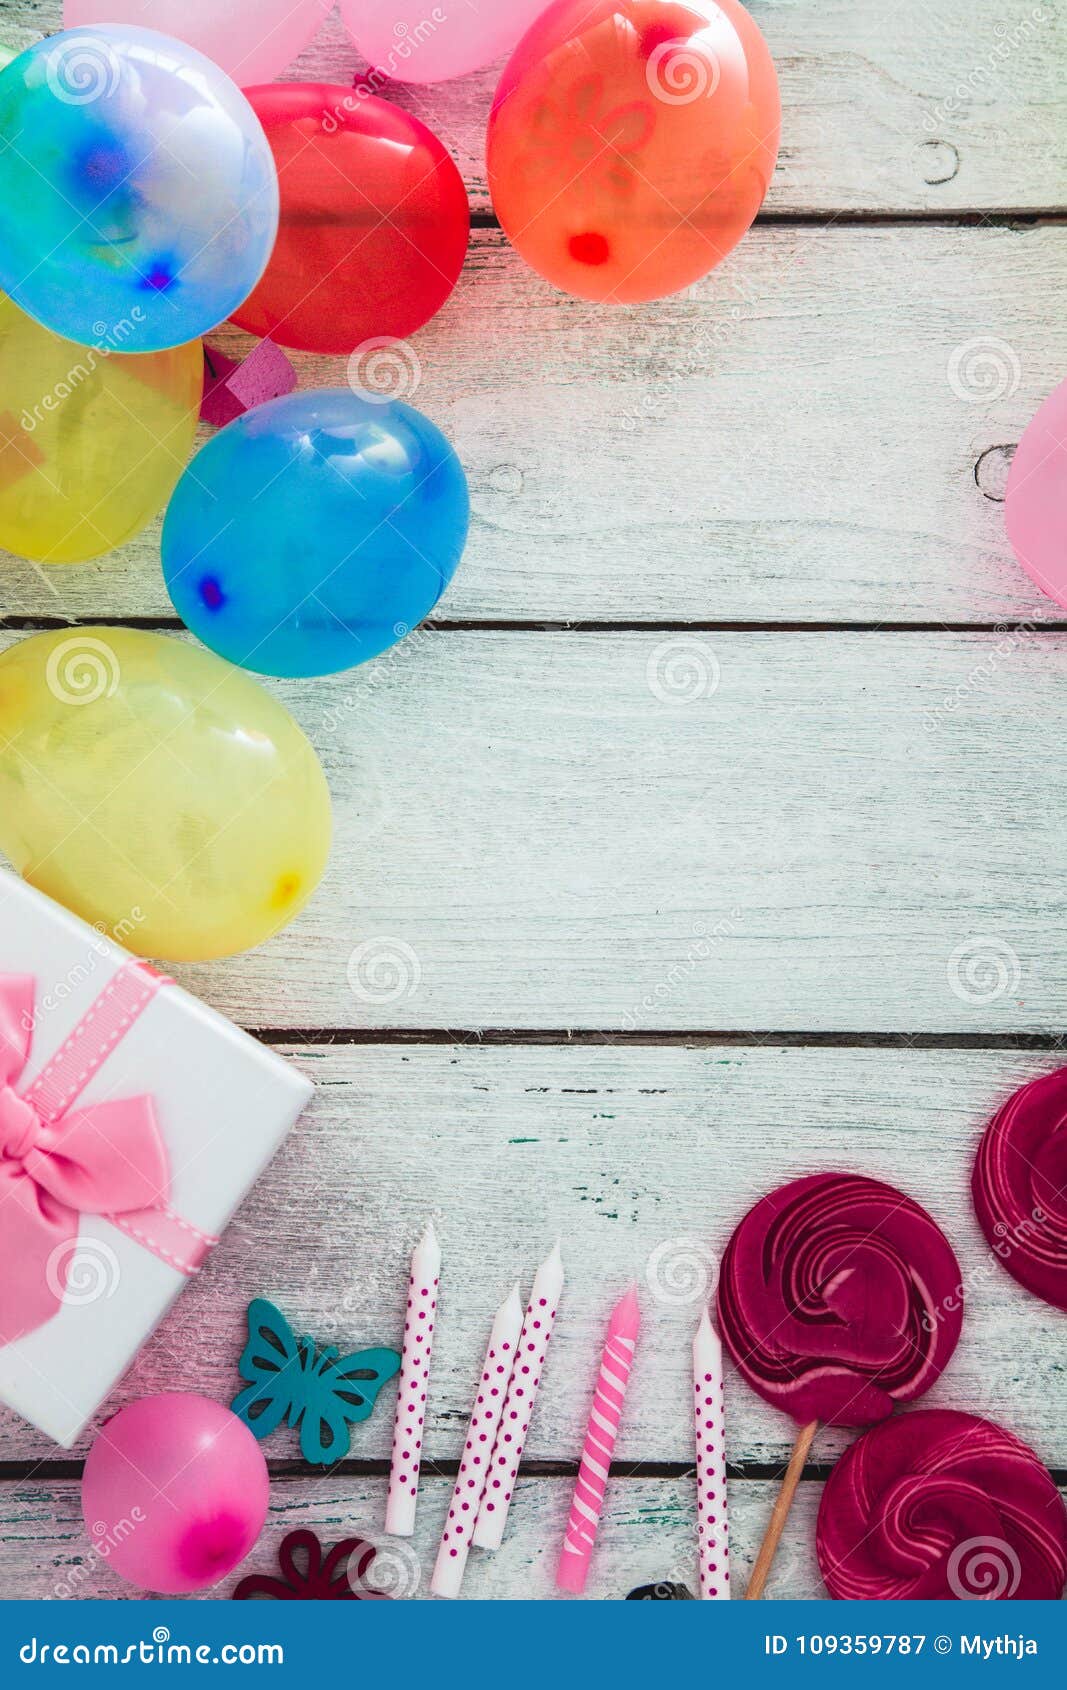 Birthday Baloons and Objects Stock Image - Image of greeting, birthday ...